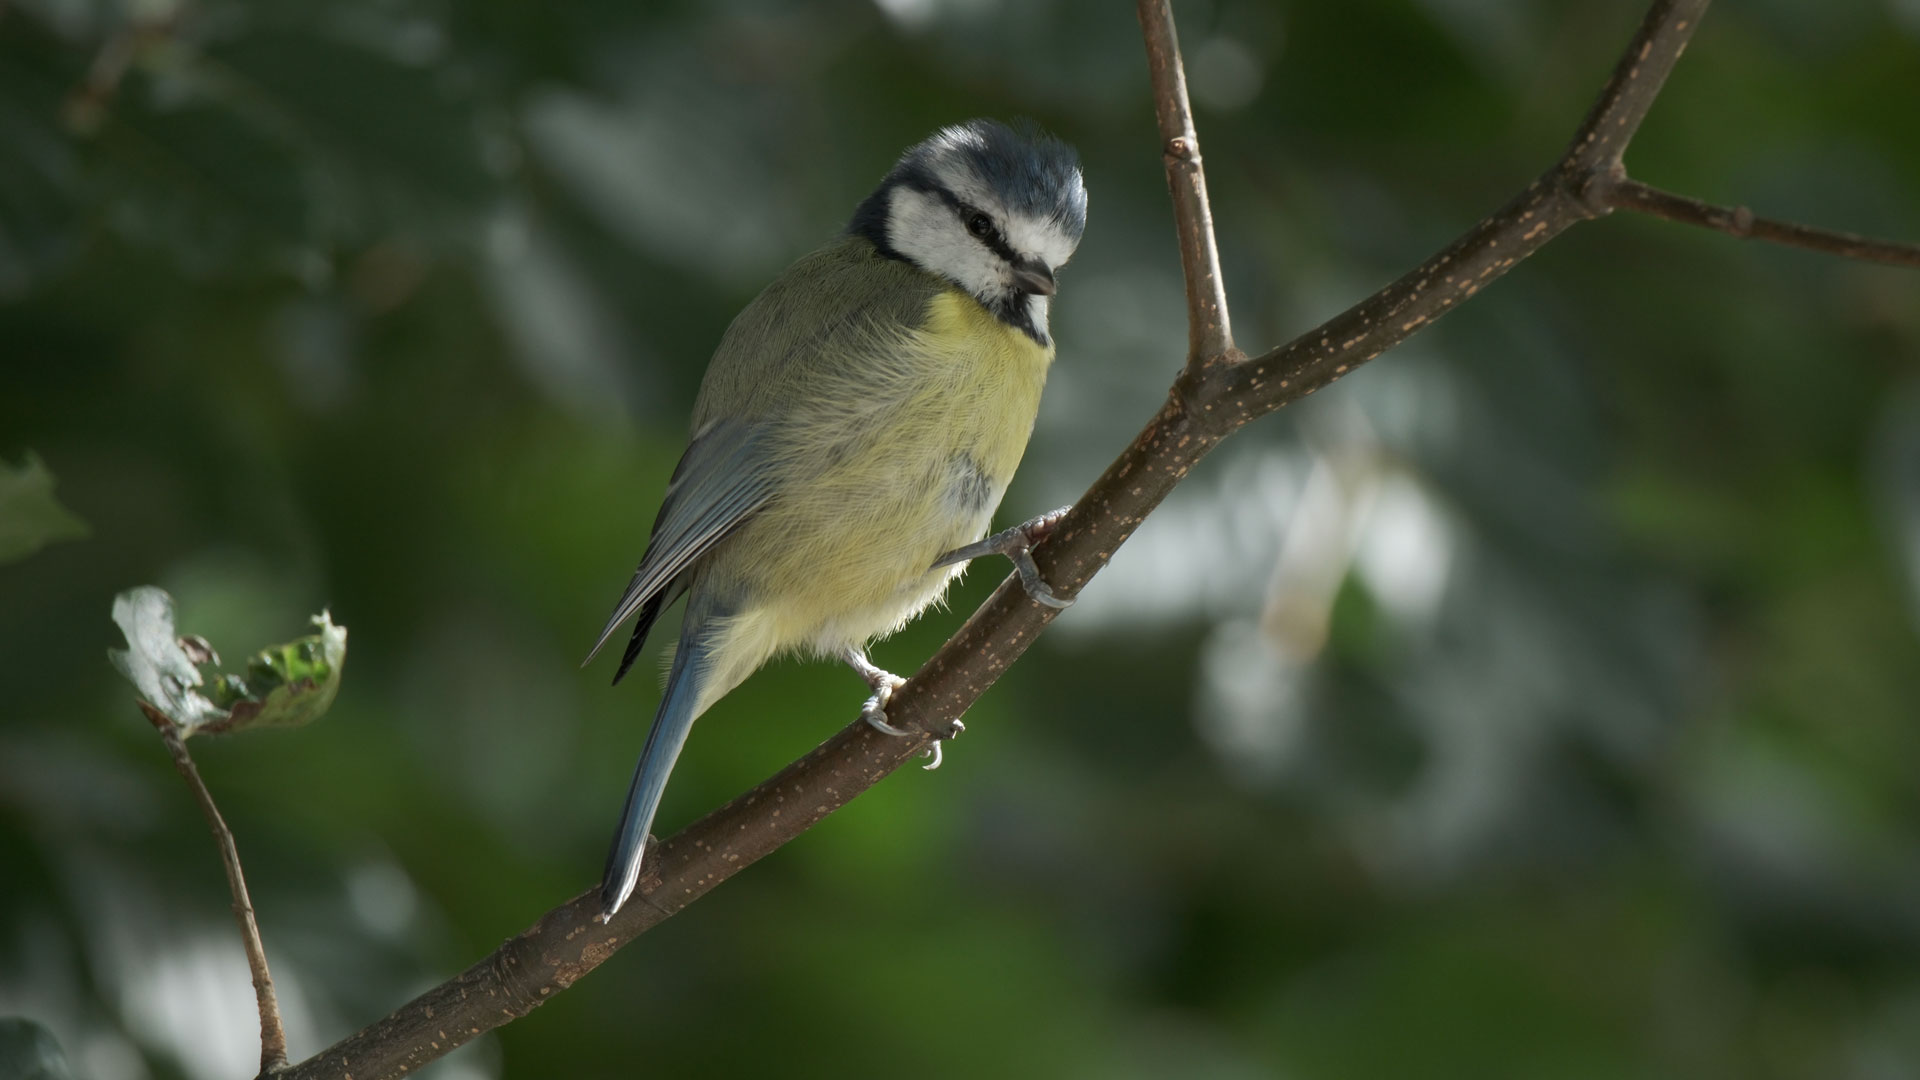 Blue tit perched on a tree